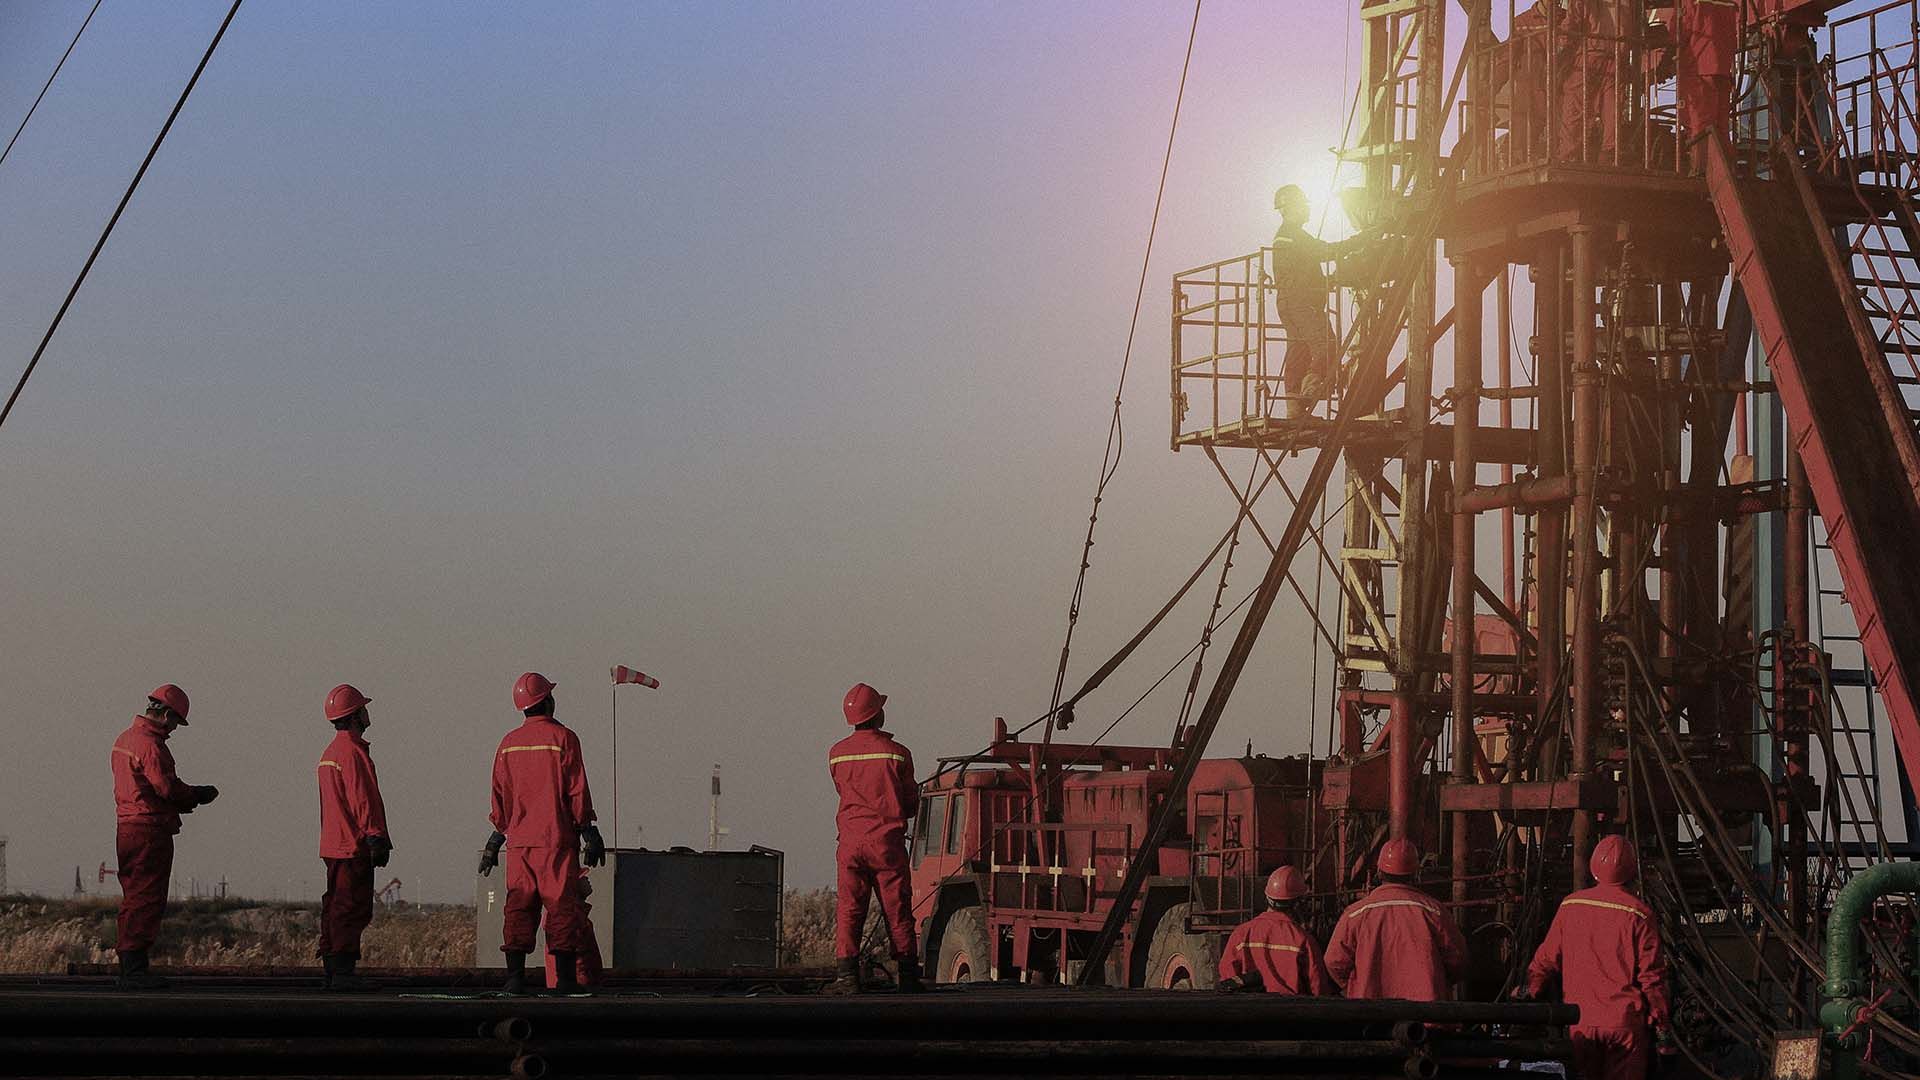 Distant, wide shot of 8 oil rig workers in red safety gear, surveying or working on an oil rig.